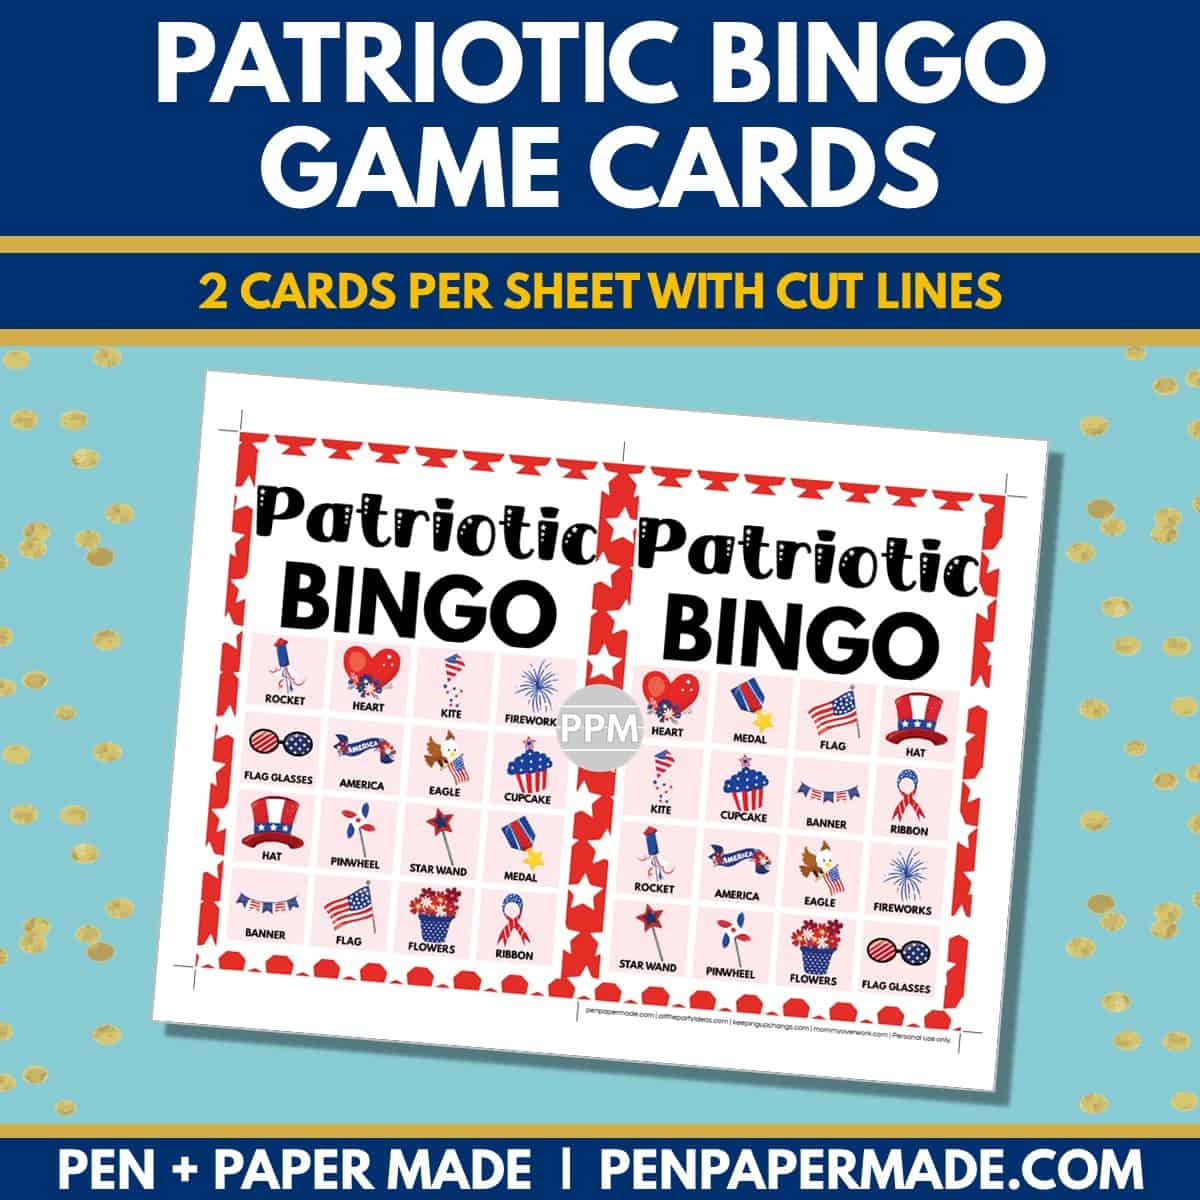 july fourth bingo card 4x4 5x7 game boards with images and text words.